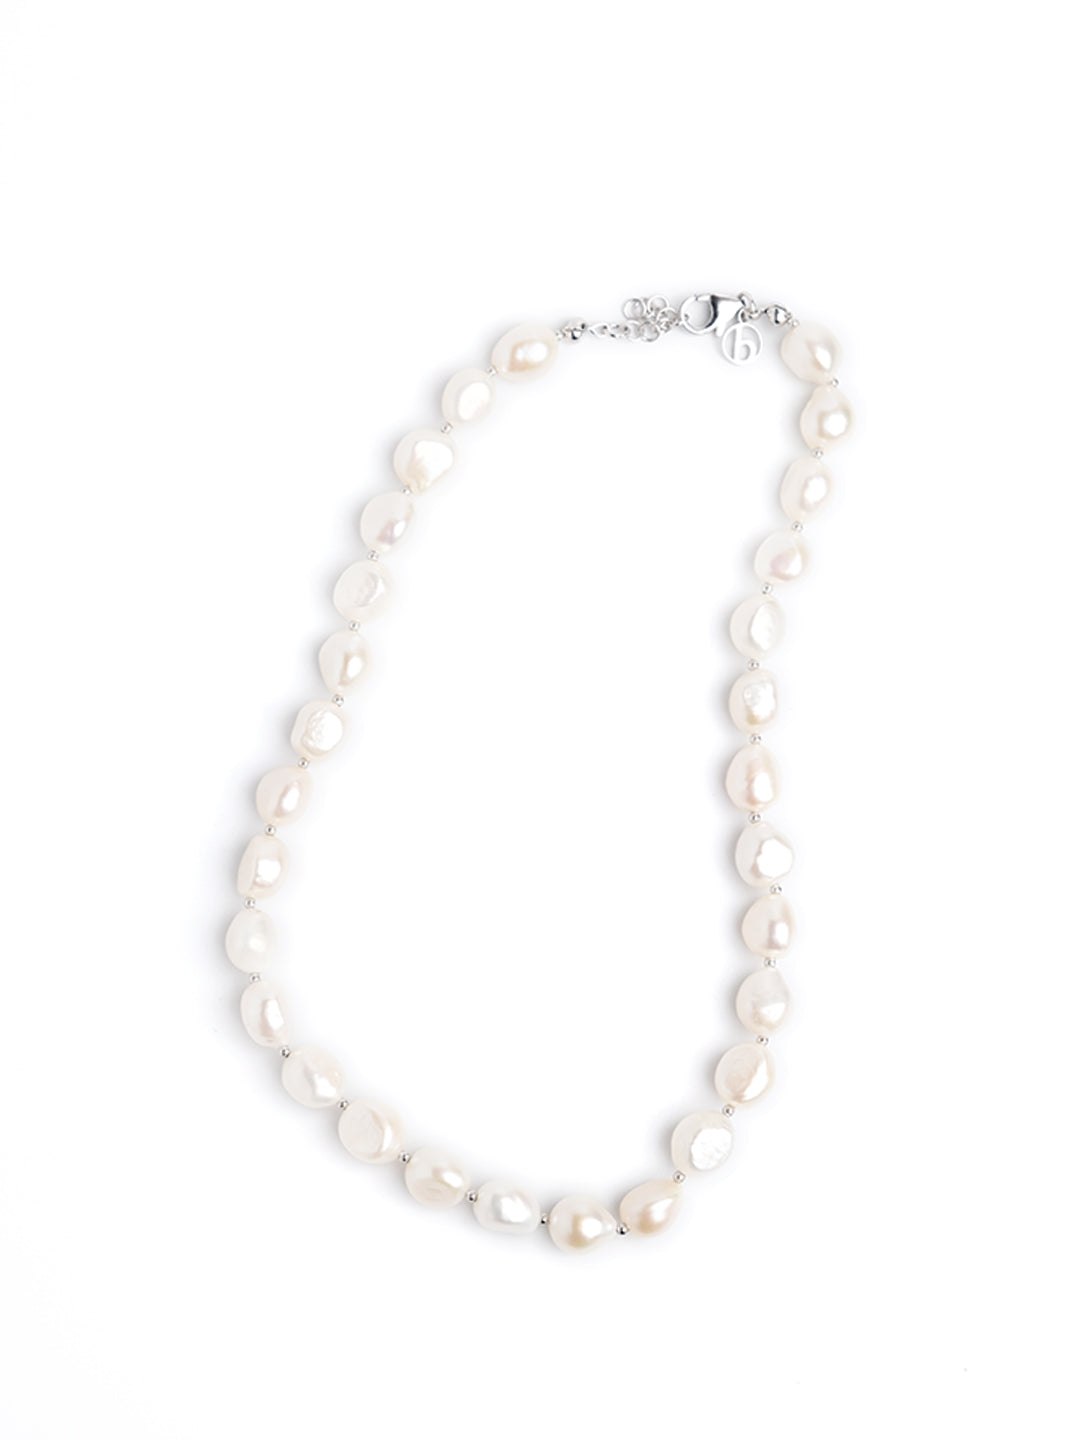 Buy real pearl pebble necklace for men and women at Butter & Co online store